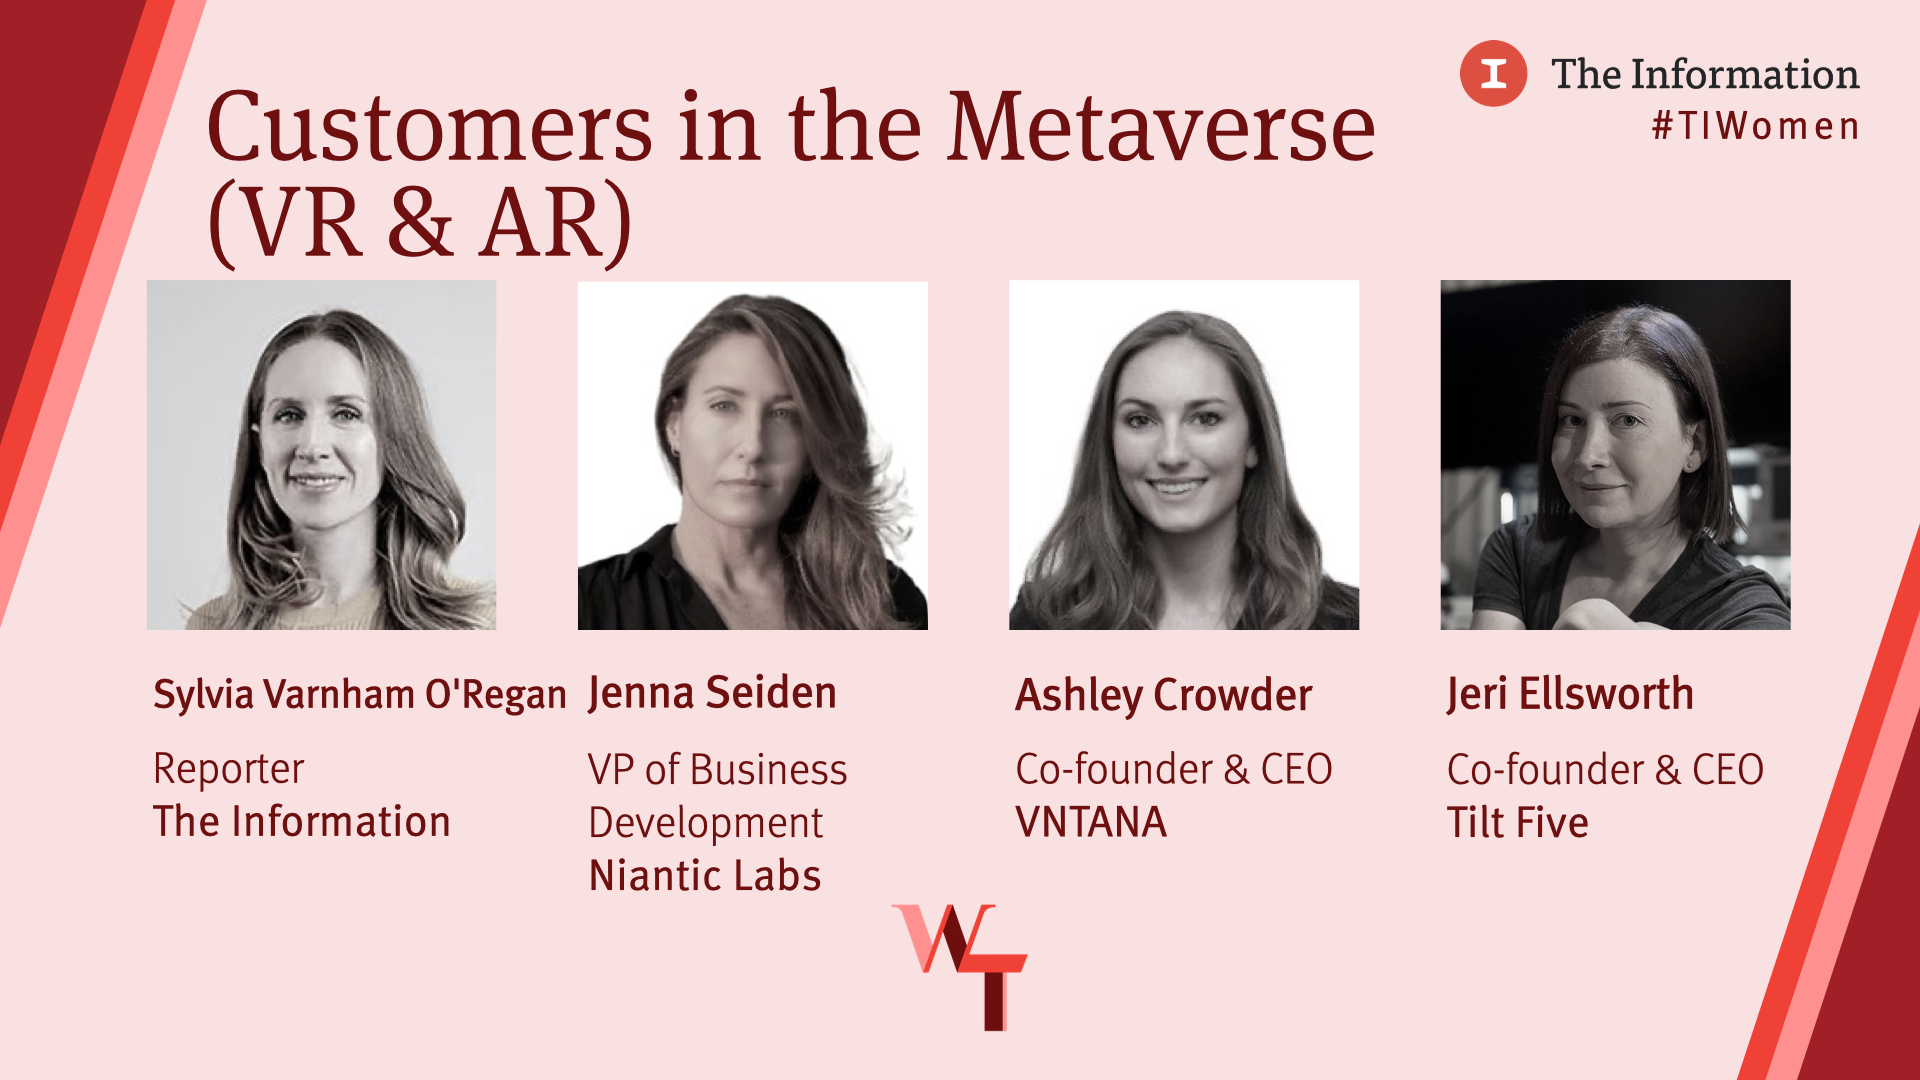 Women in Tech: Customers of the Future - Customers in the Metaverse (VR & AR)